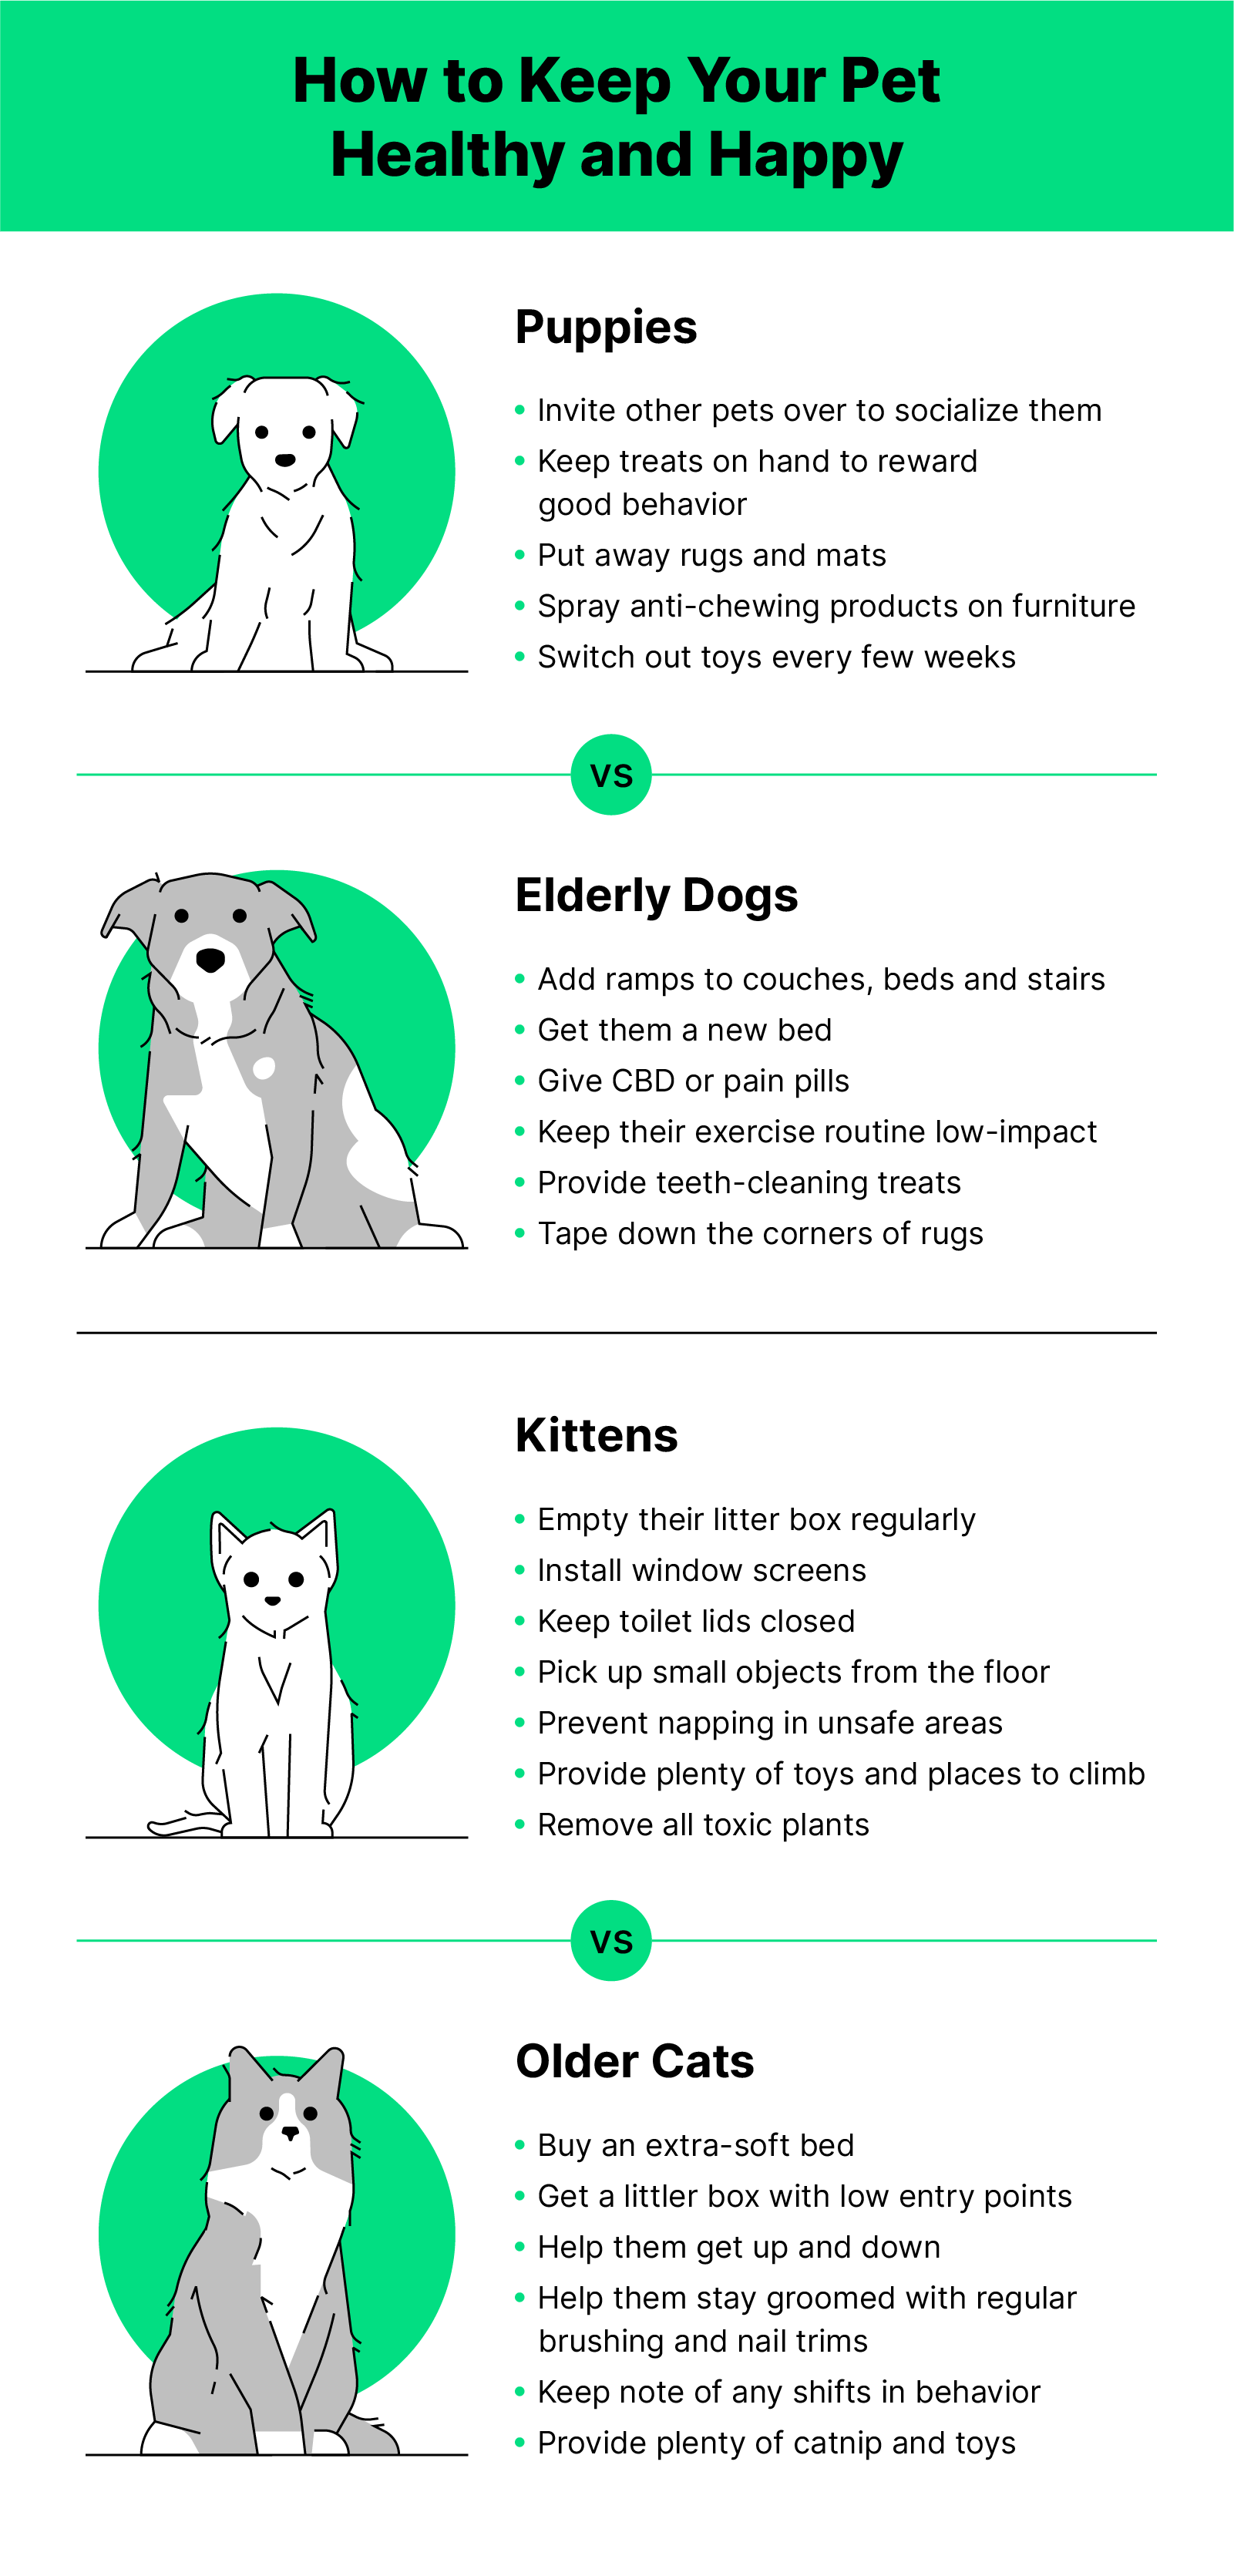 Illustrations of puppies, dogs, kittens and cats with tips